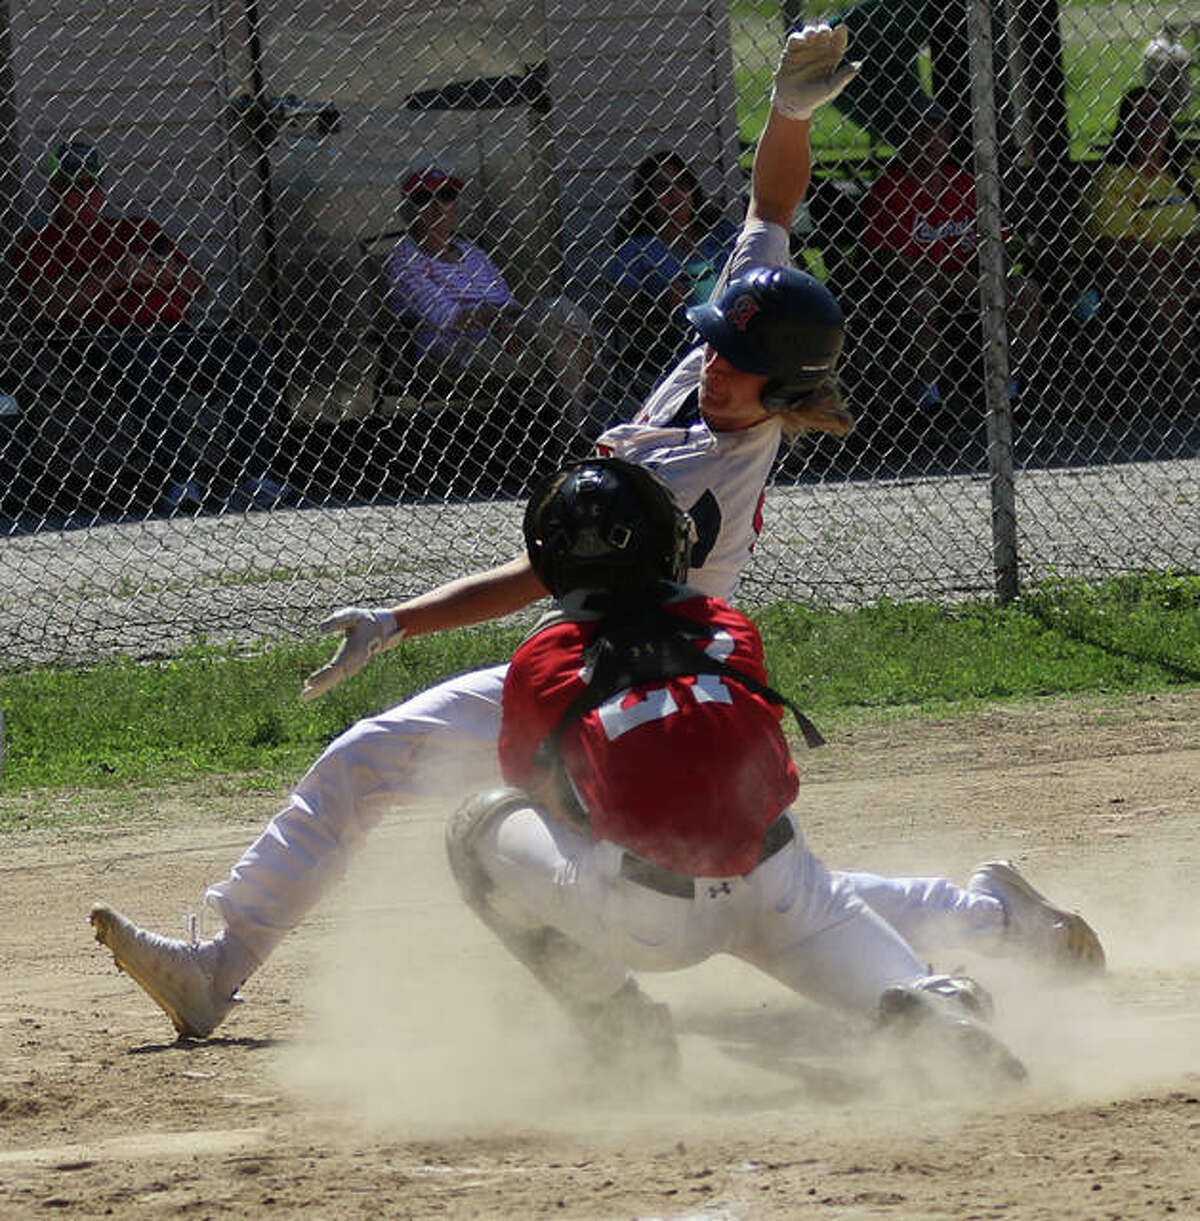 Alton’s John Durrwachter (back) cannot elude the tag from Highland’s catcher and is out on a play at the plate in the first game of a doubleheader Sunday at P.I.C. Park in Pierron.